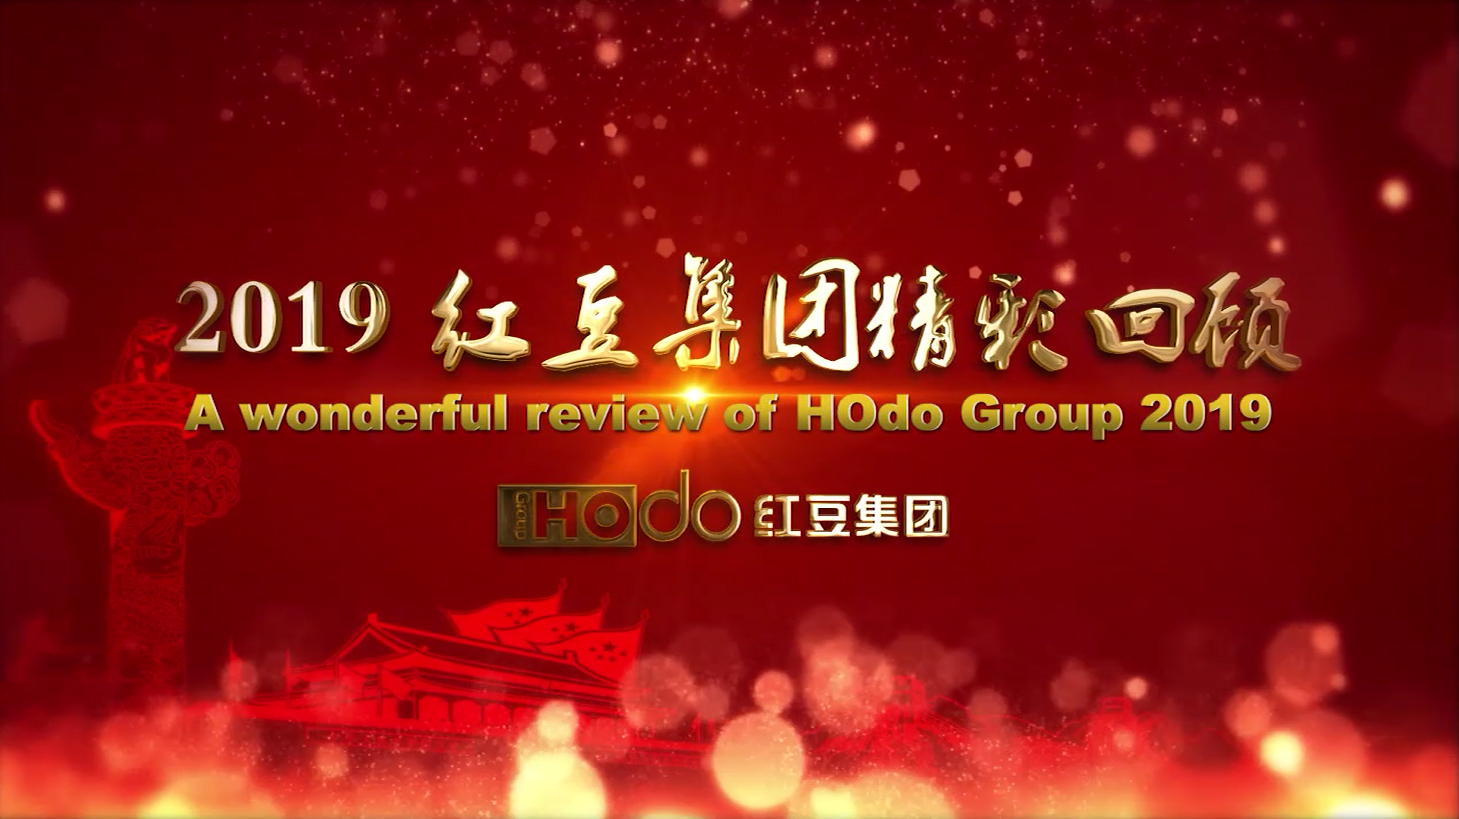 A wonderful review of HOdo Group 2019